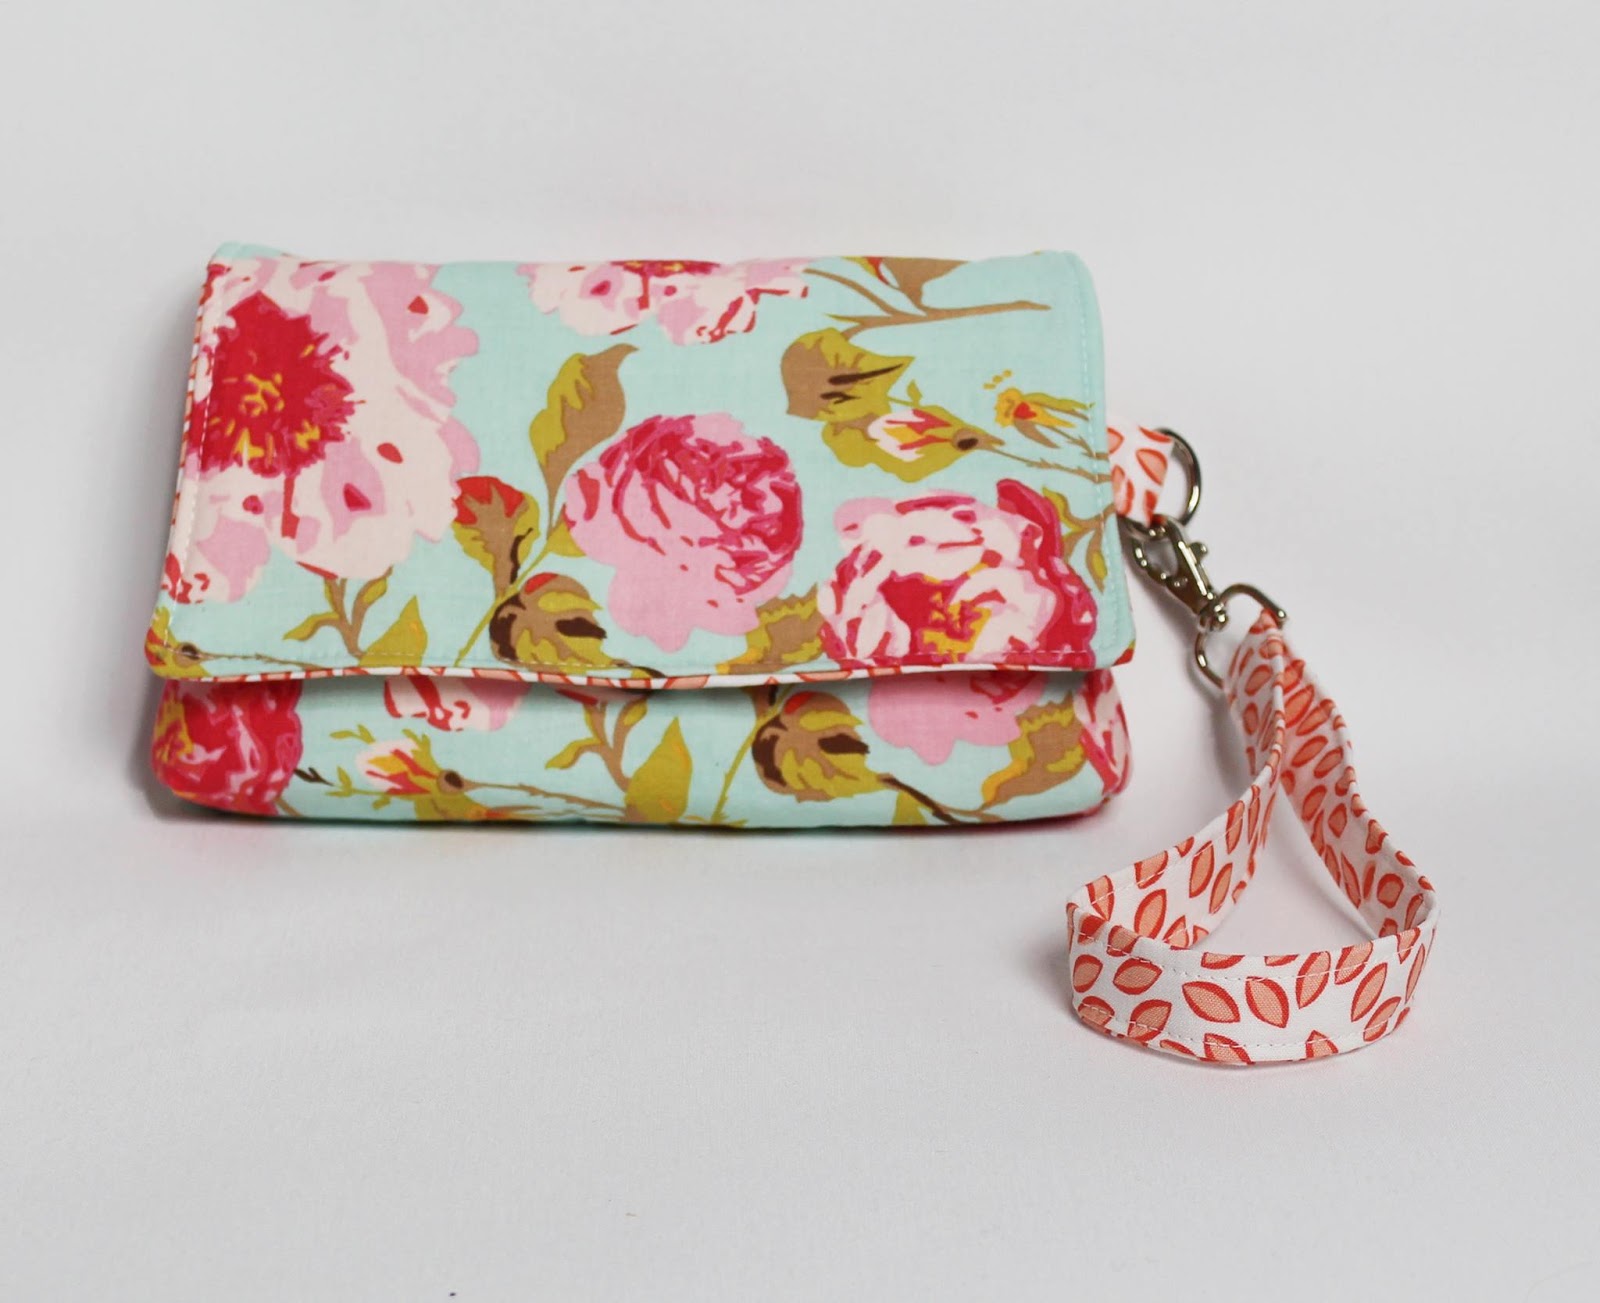 Tiger in a Tornado: Another Great Sew Along! (Kiss Clutch Sew Along)